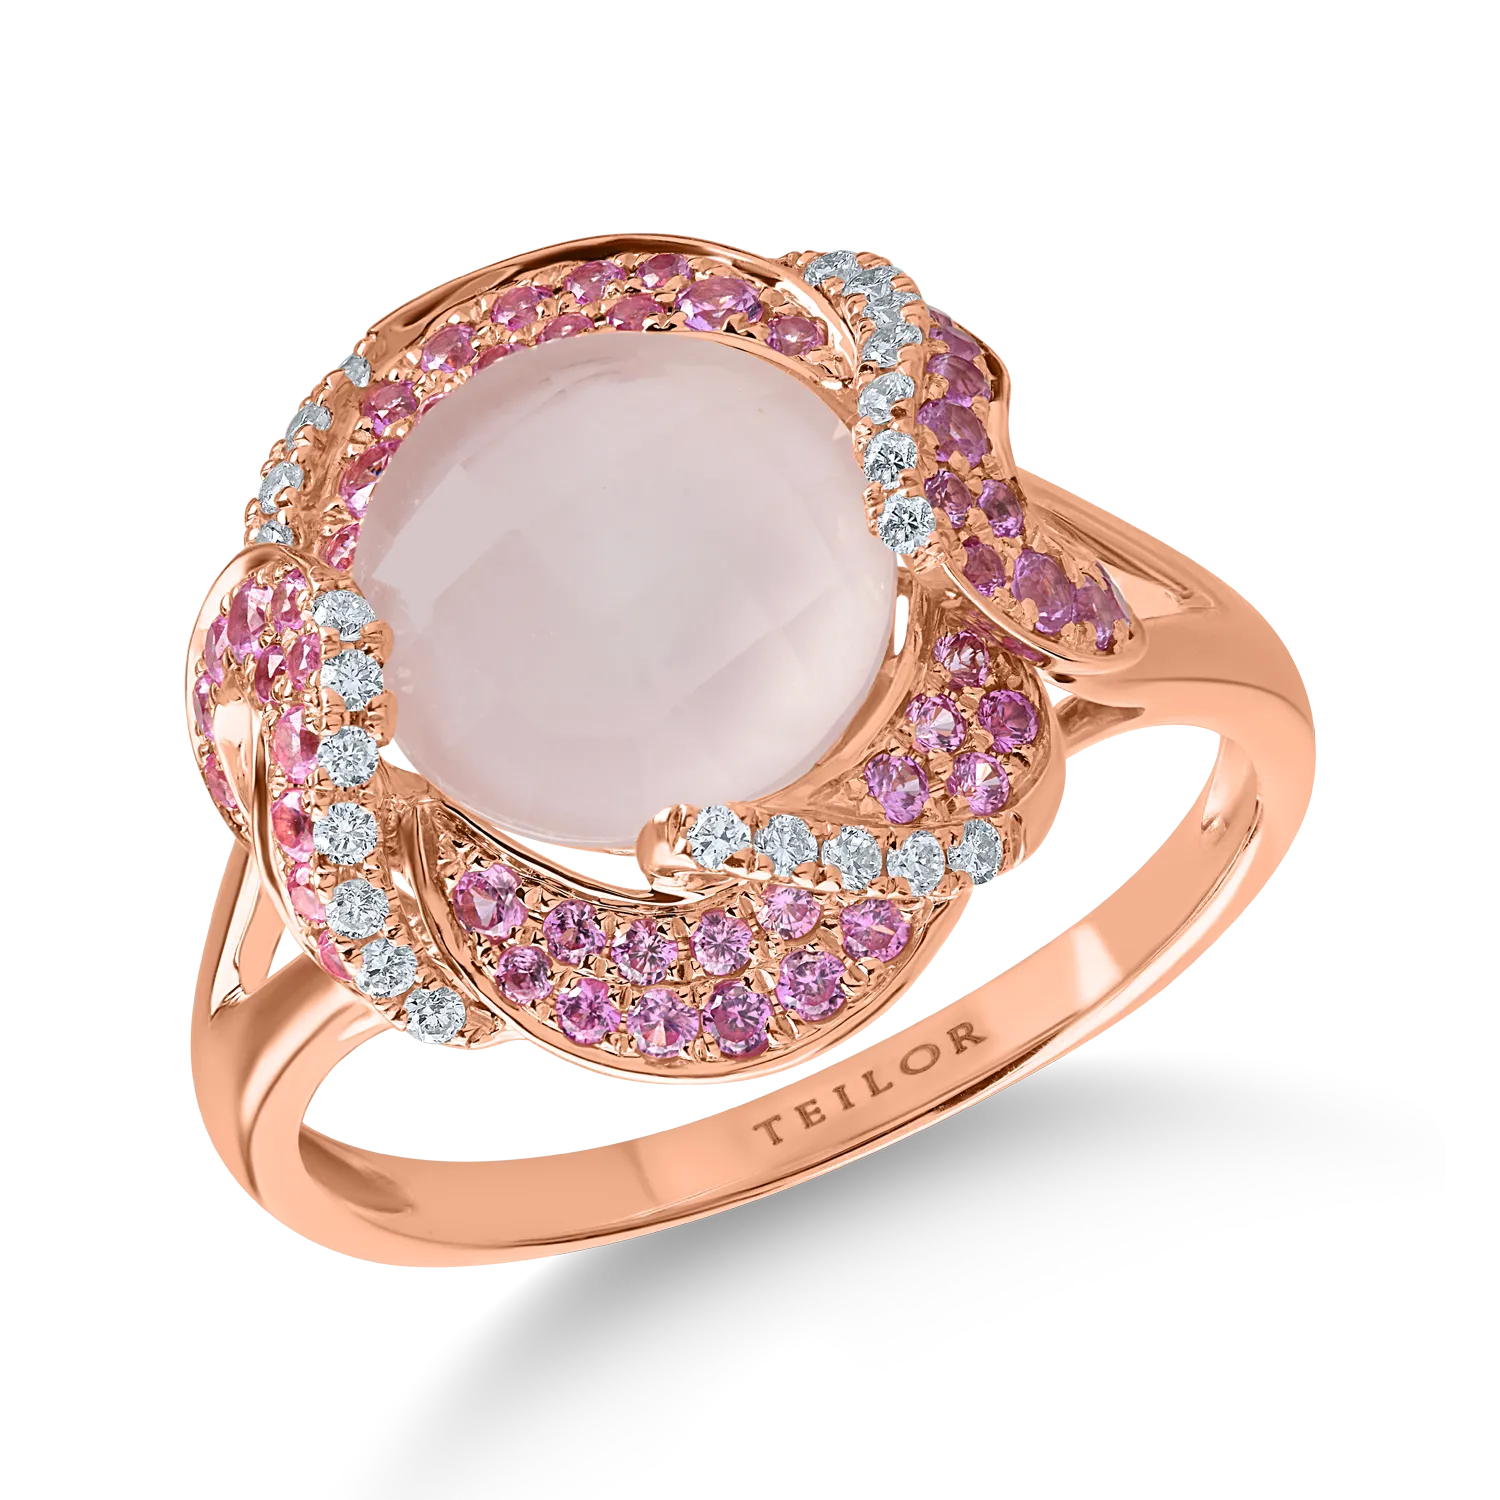 Rose gold ring with 3.4ct precious and semi-precious stones